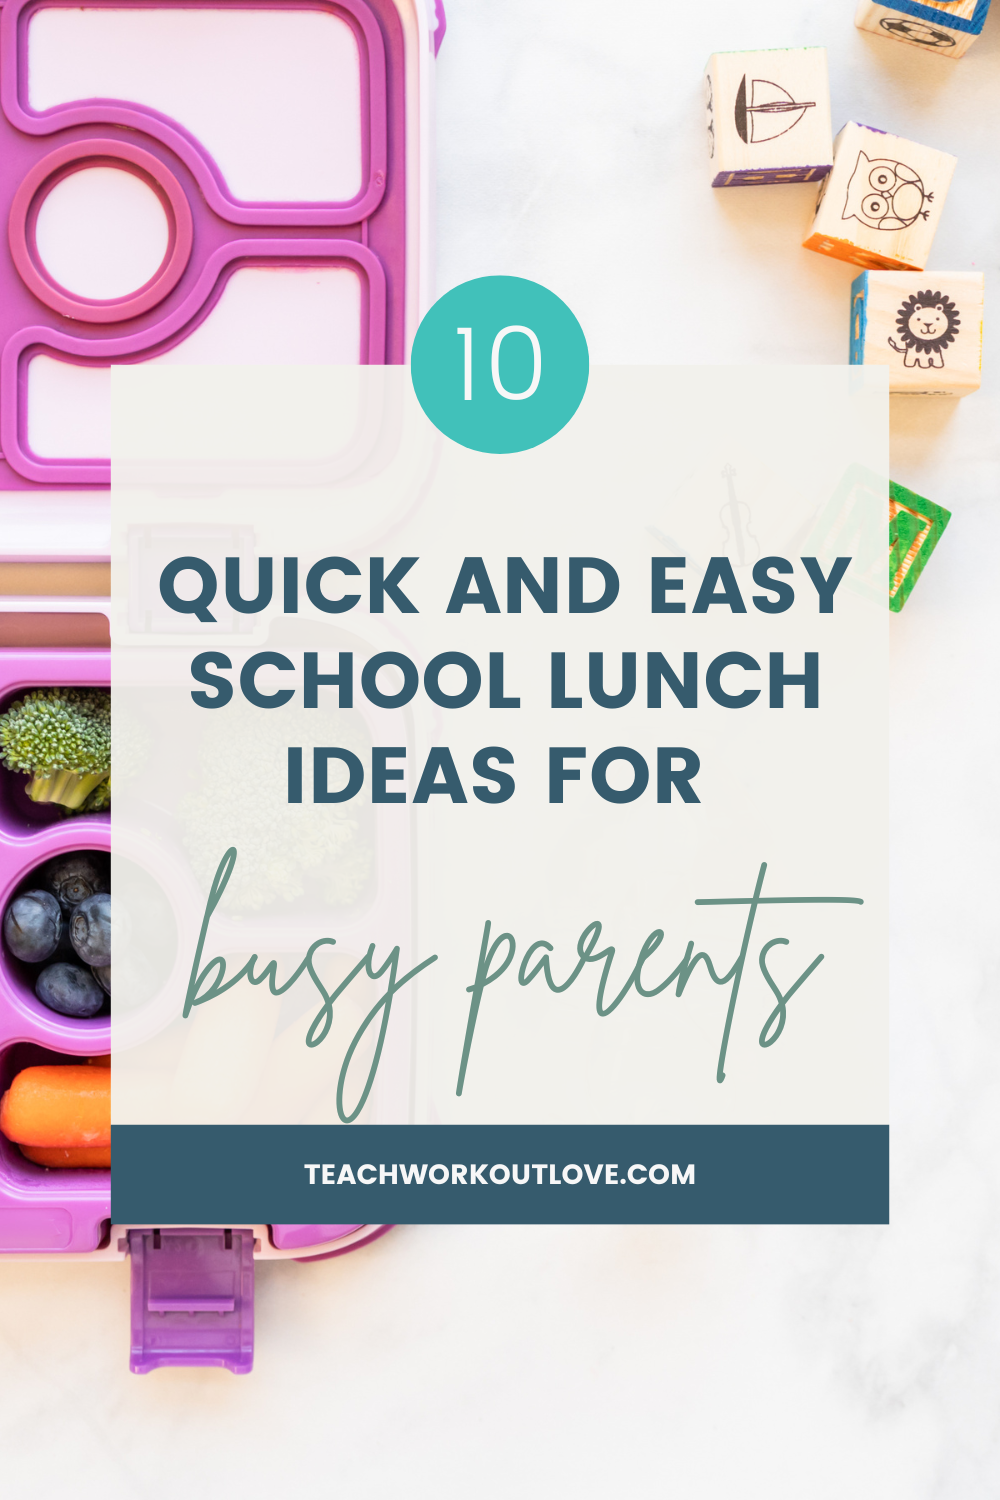 Lunches need to be cheap, healthy, and easy to prepare. Believe it or not, it is possible to meet all three goals if you know where to look. Below, you’ll find ten quick and easy school lunch ideas that you can take advantage of if you are a busy parent with several children.